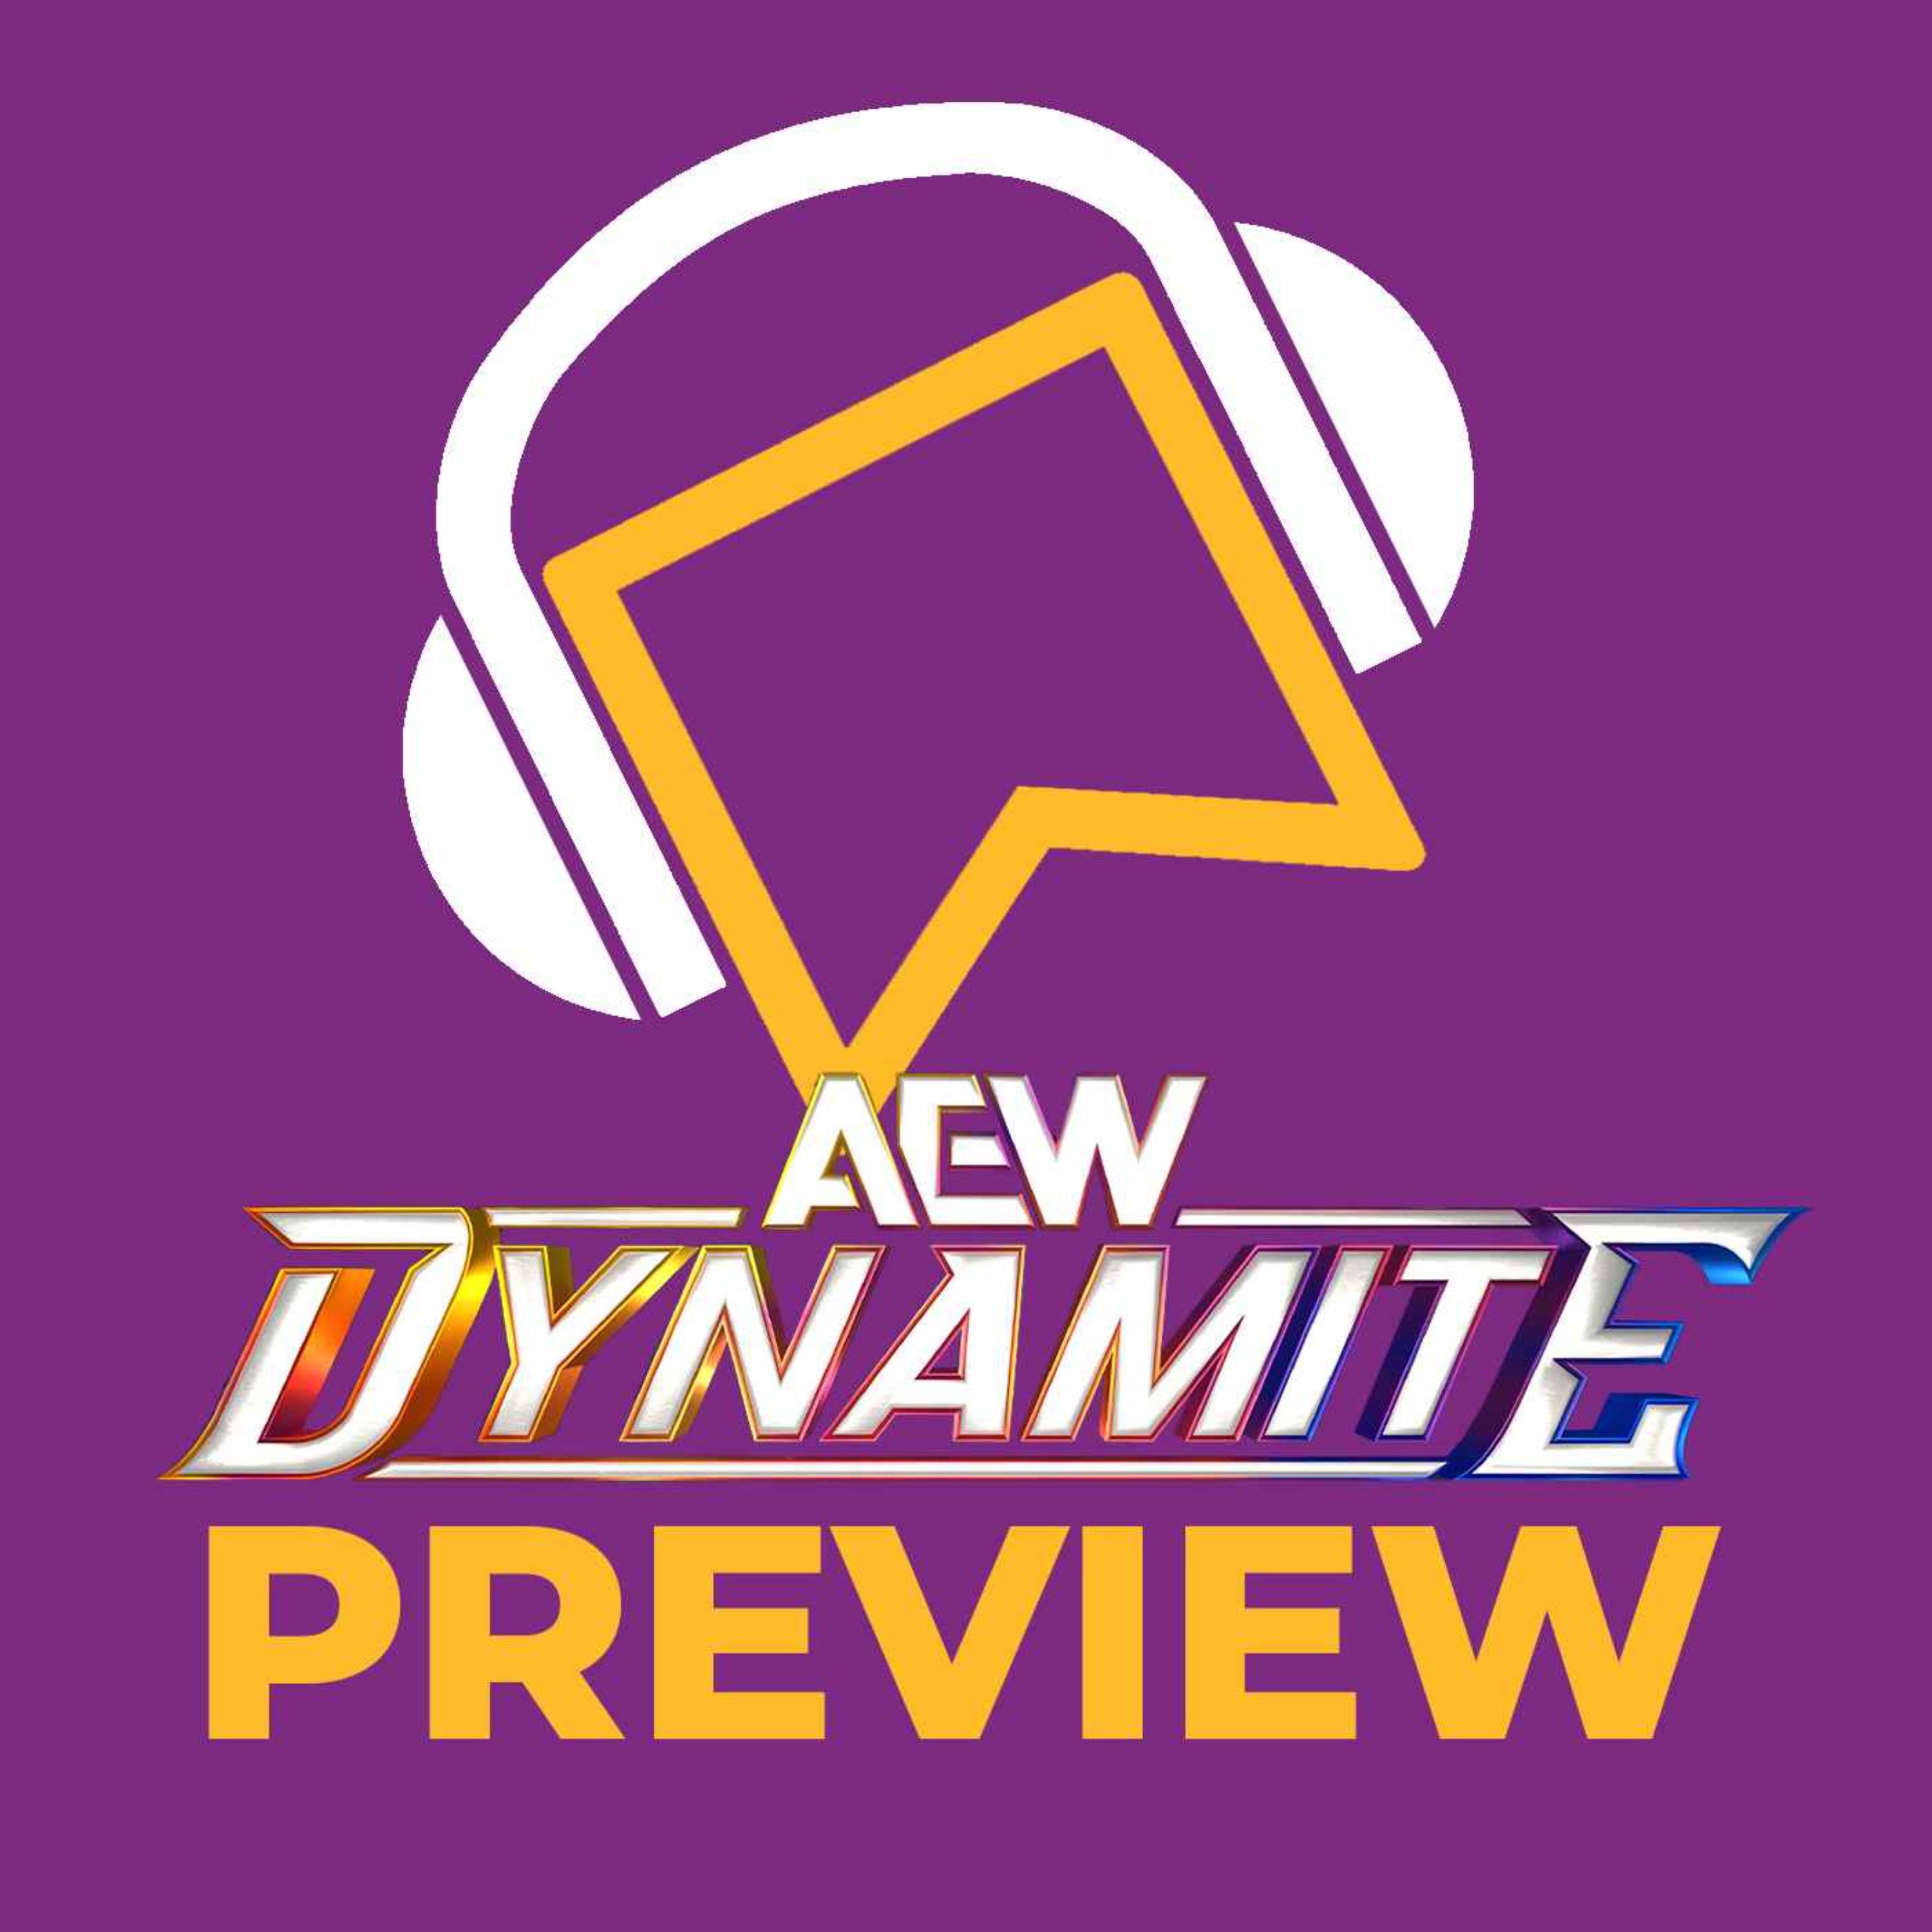 AEW Dynamite Preview - Double Or Nothing FALLOUT! What Next For MJF? Who Faces Swerve At Forbidden Door? The Debut Of 'TV Time' With Chris Jericho?!